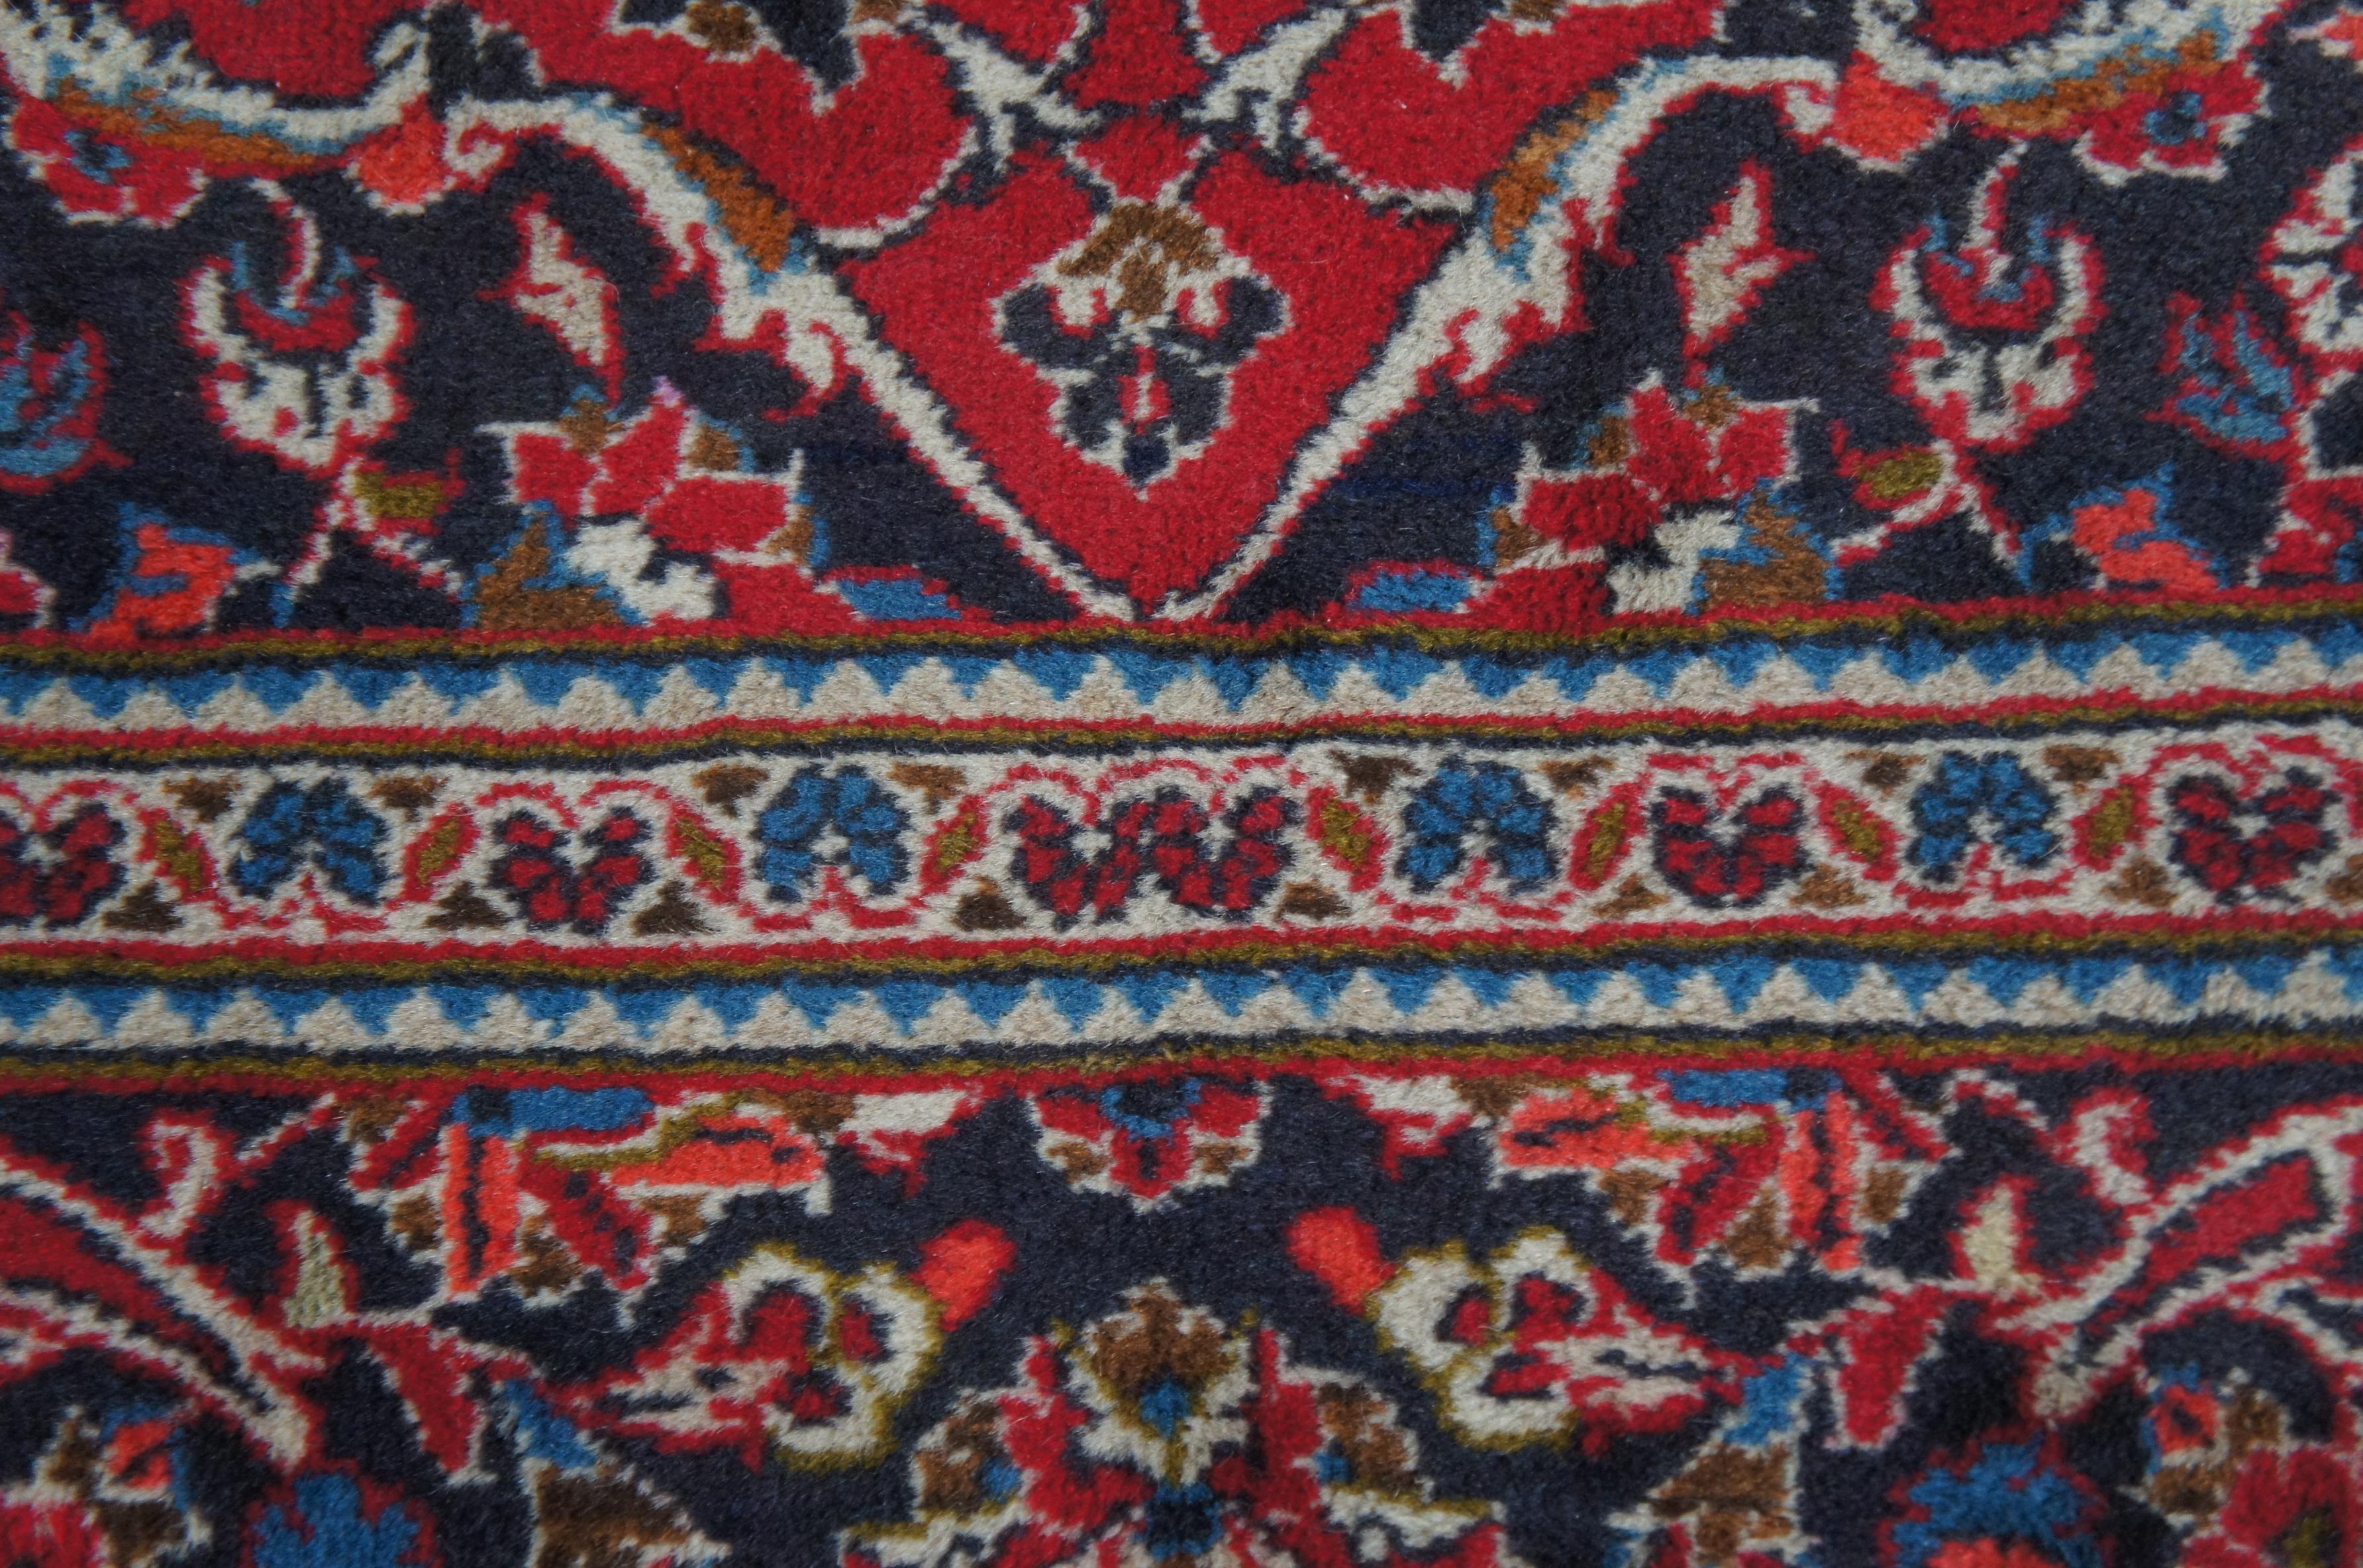 Vintage Hand Knotted Kashan Persian Blue & Red Wool Area Rug Carpet 6.5' x 10' For Sale 2